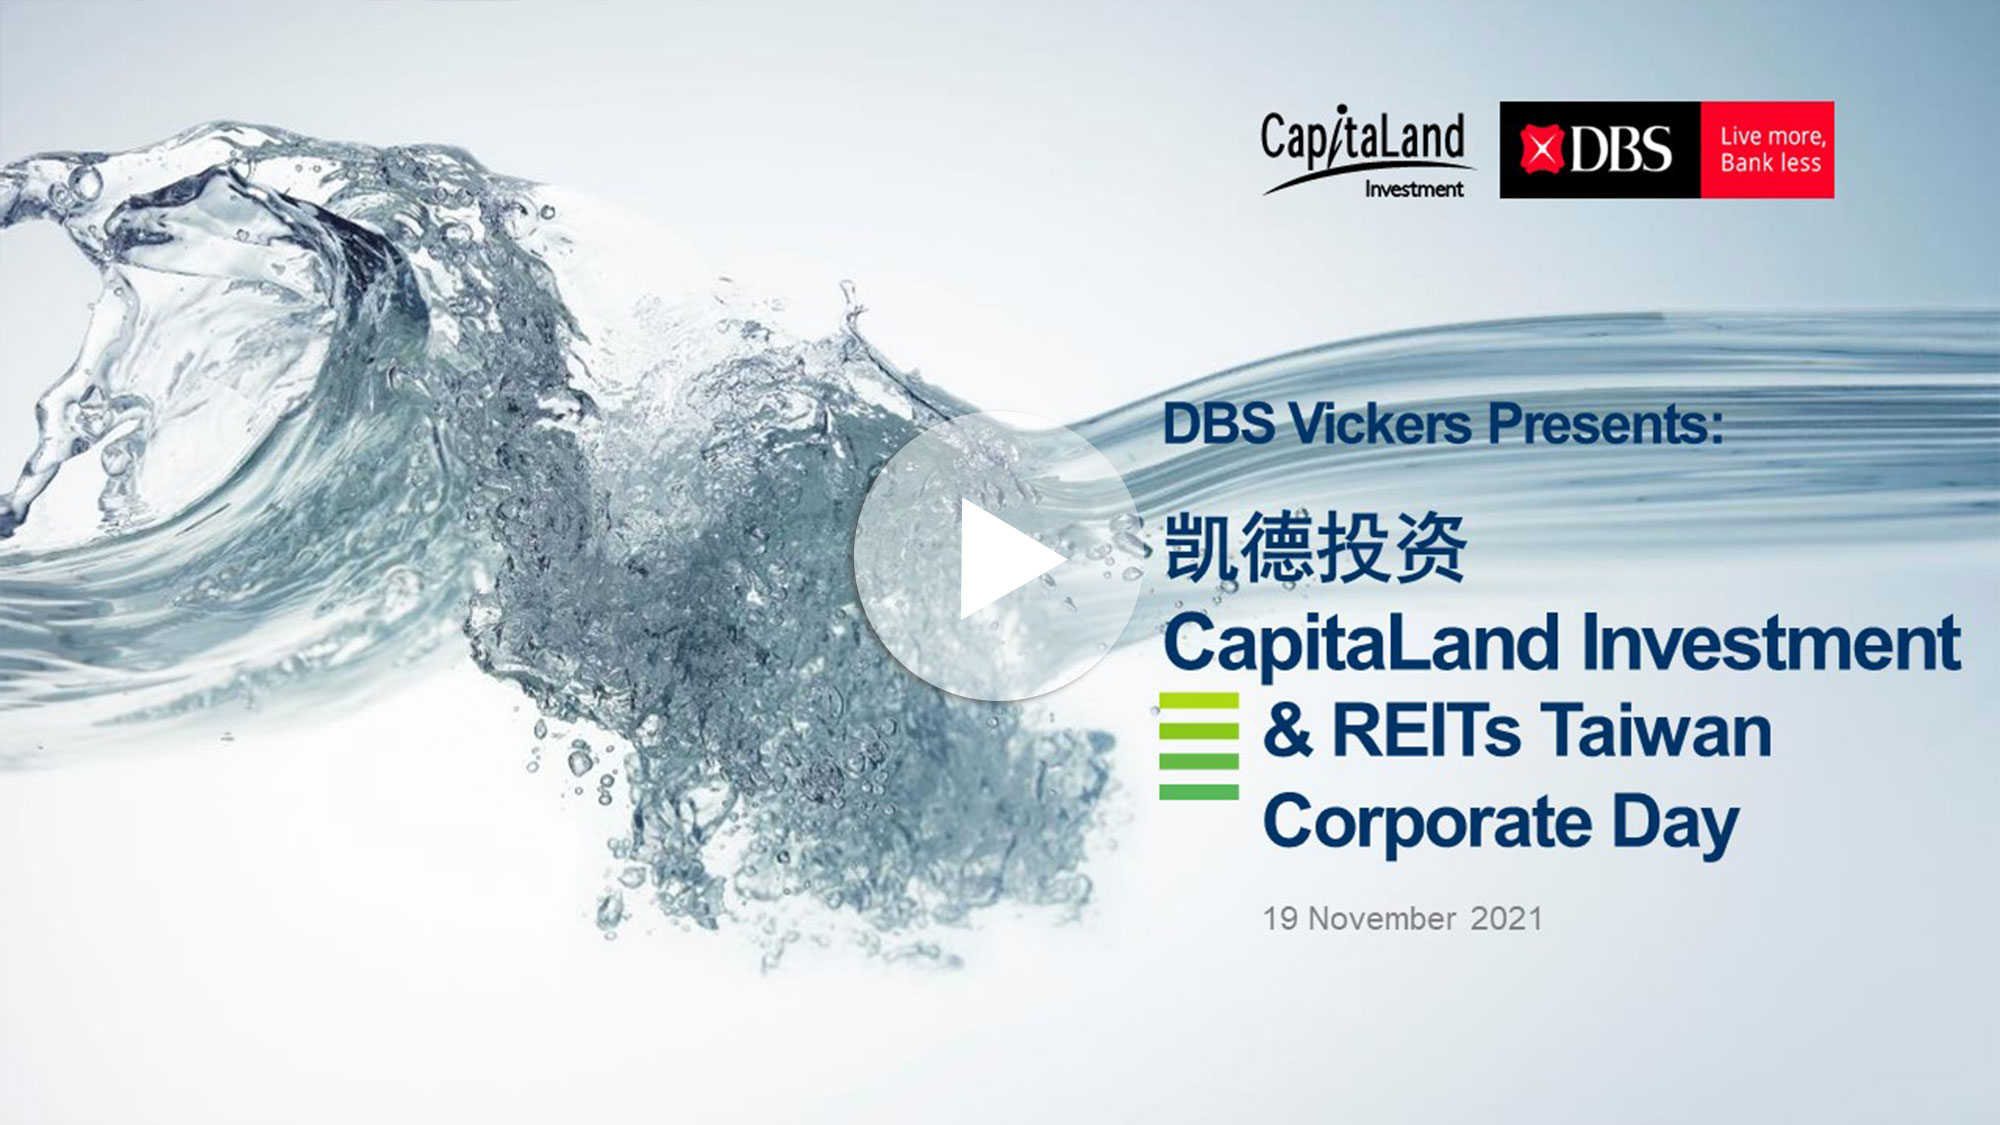 CapitaLand Investment & REITs Taiwan Corporate Day - Session 1